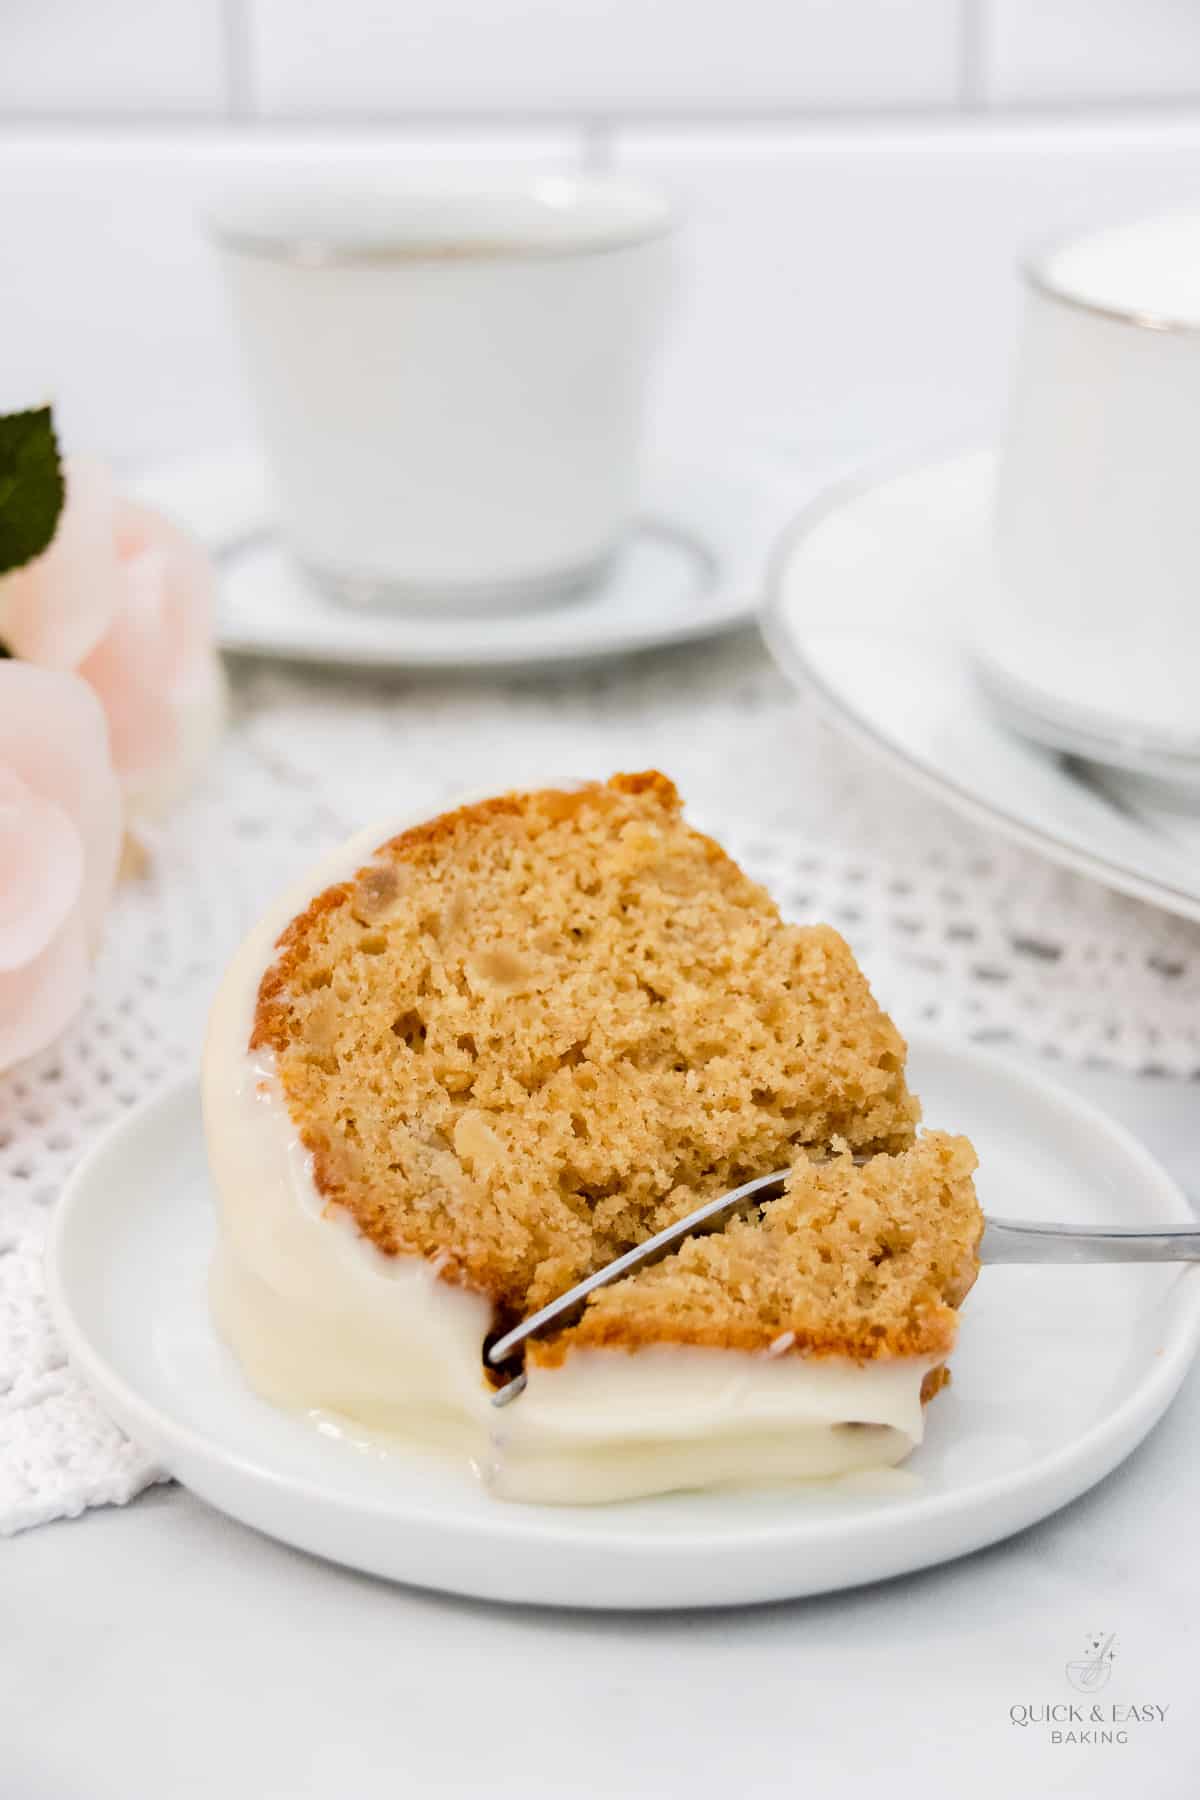 Slice of apple cake with a fork in it on a plate.